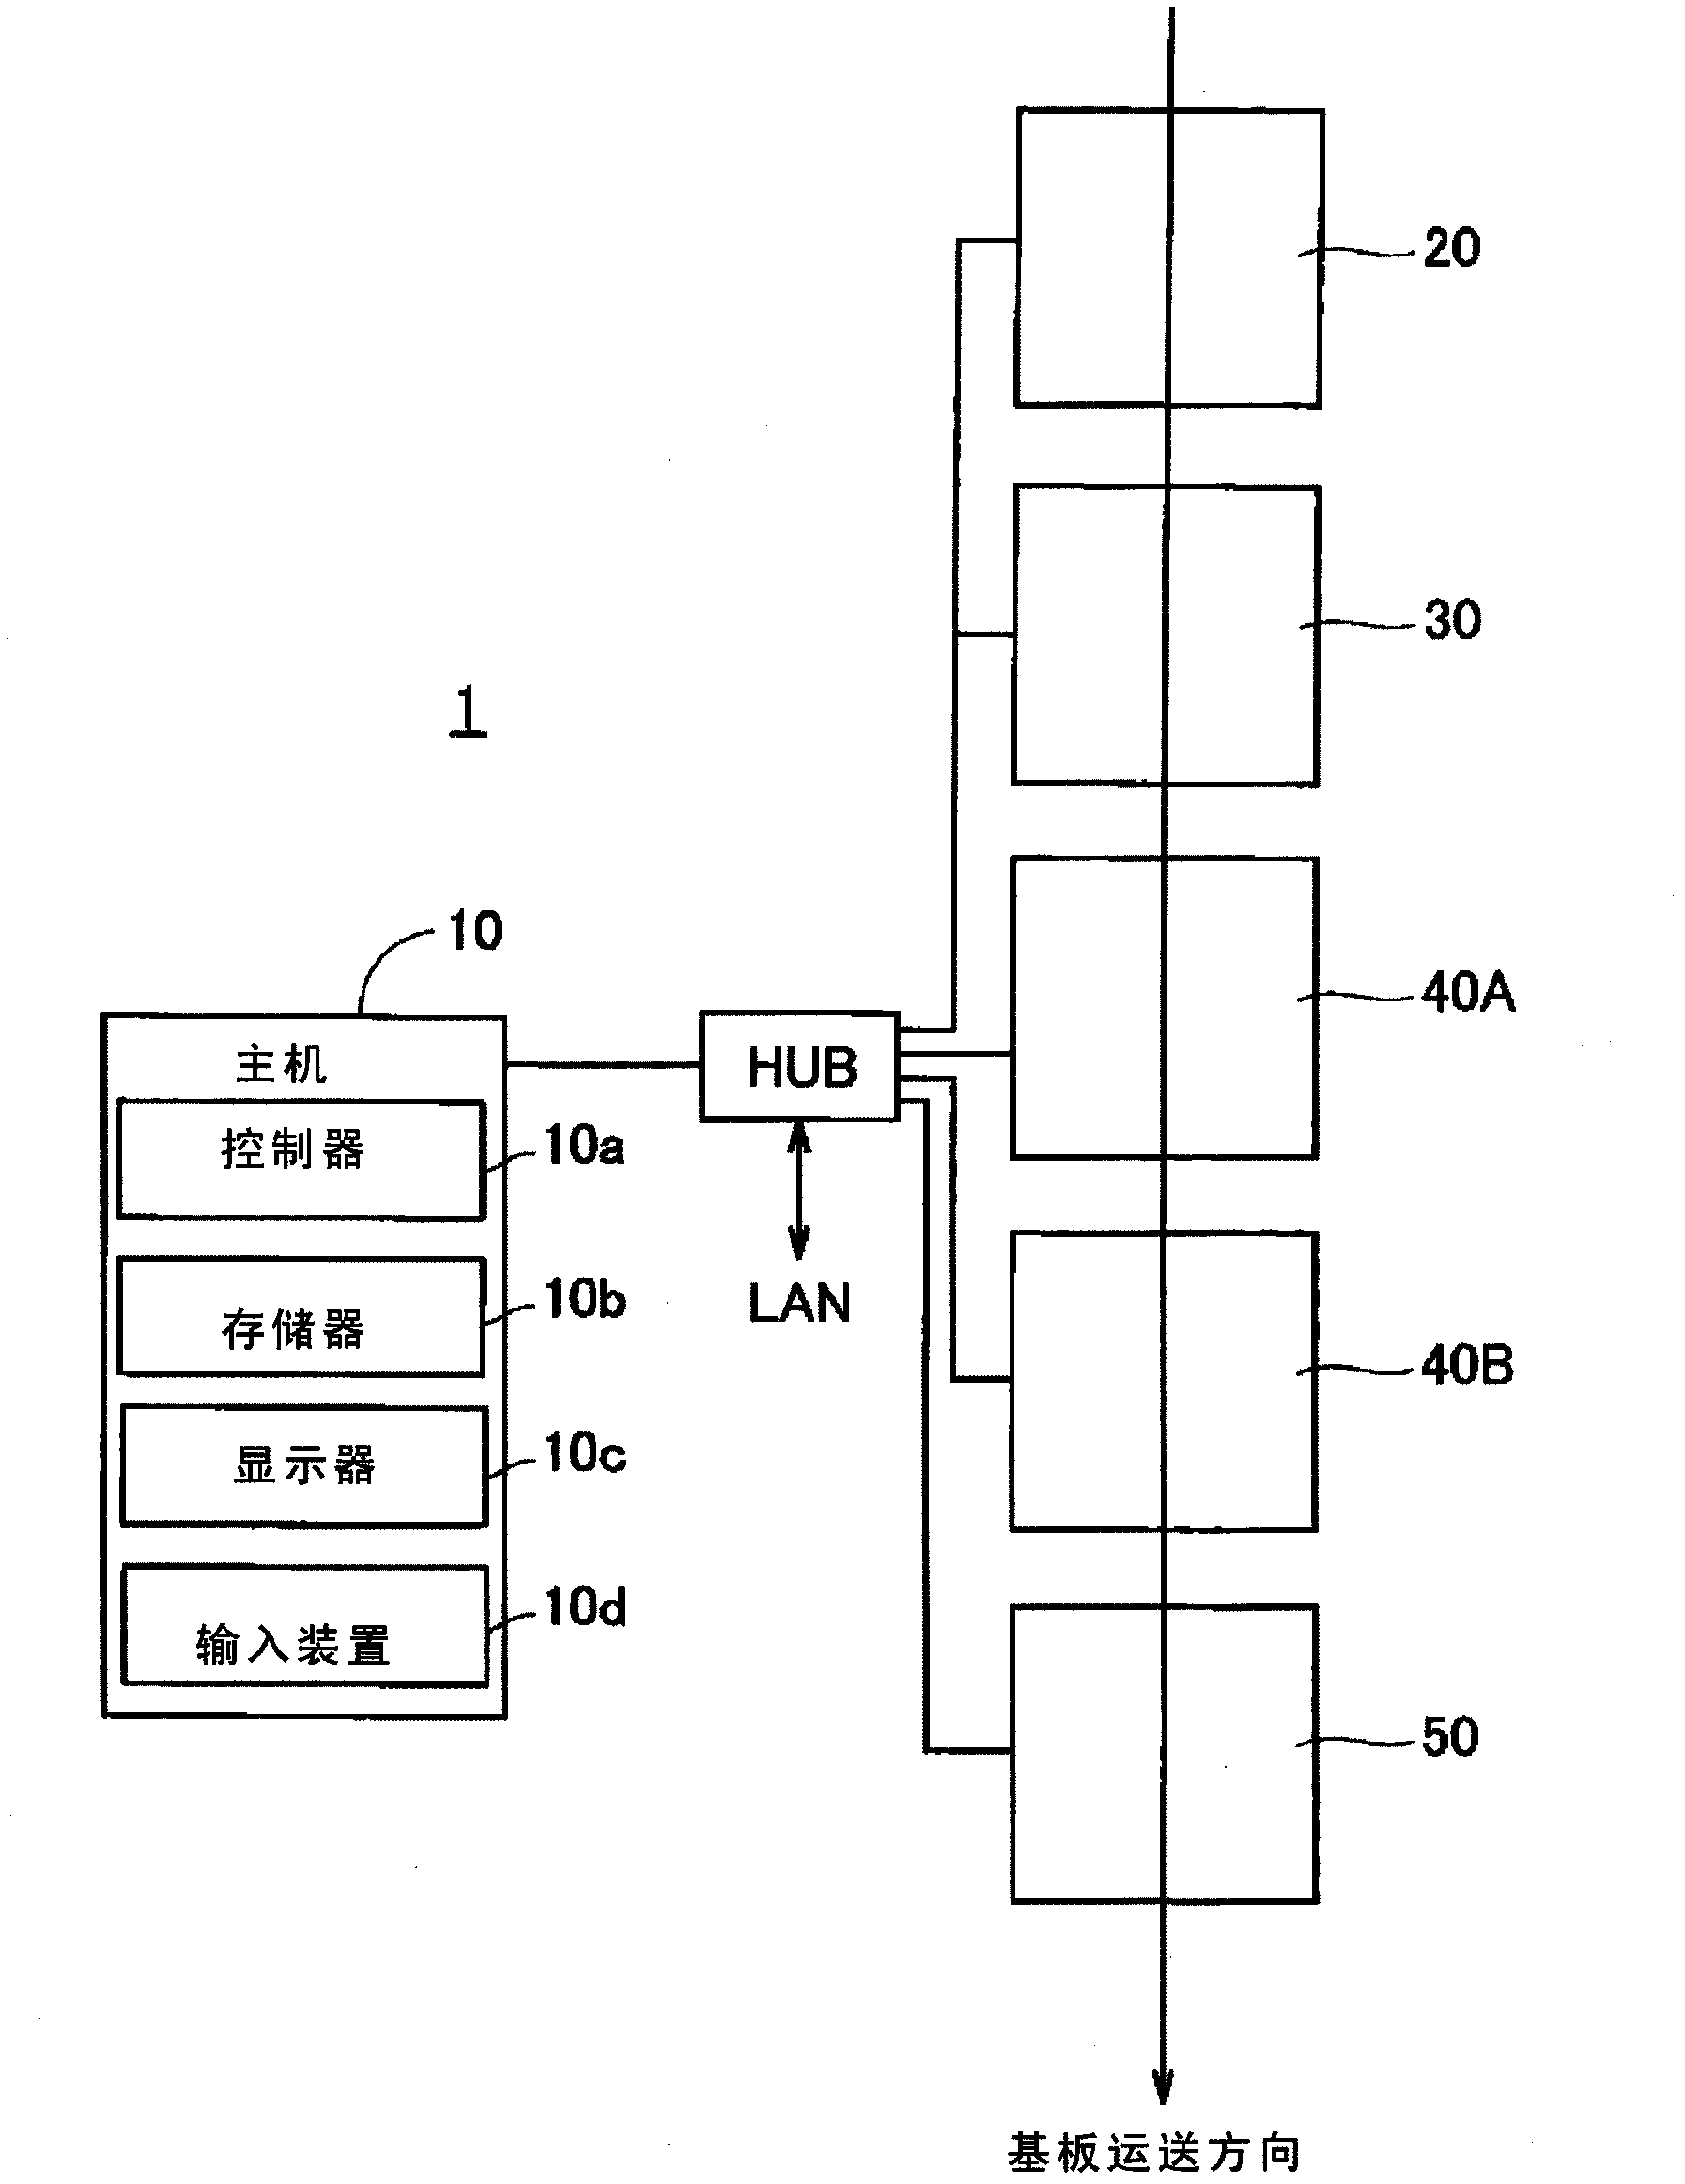 Method of manufacturing printed wiring board with surface-mount component mounted thereon